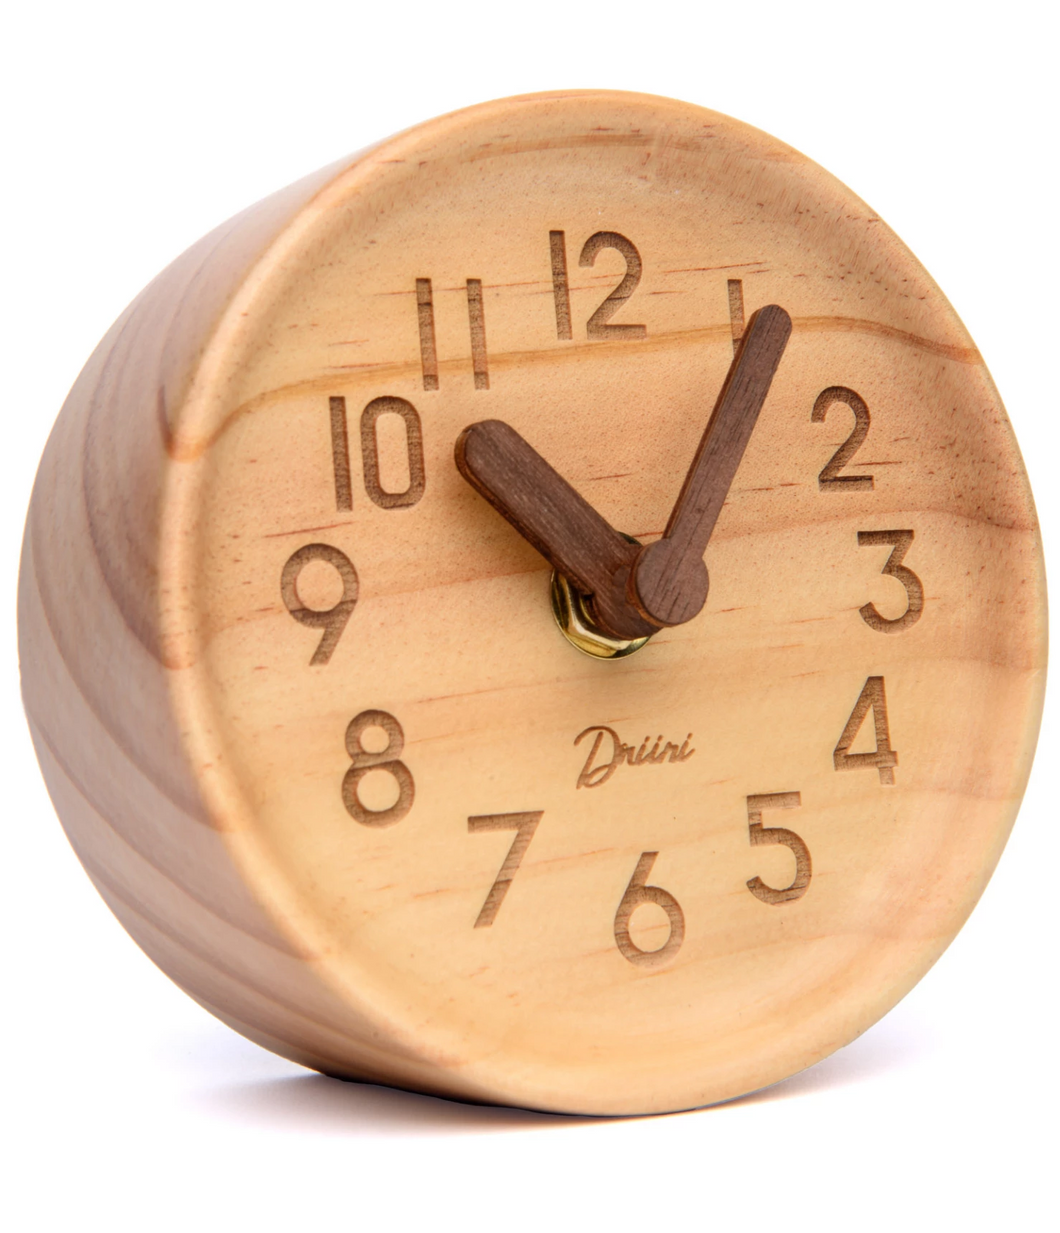 Driini Wooden Desk & Table Analog Clock Made of Genuine Pine (Light) - Battery Operated with Precise Silent Sweep Mechanism